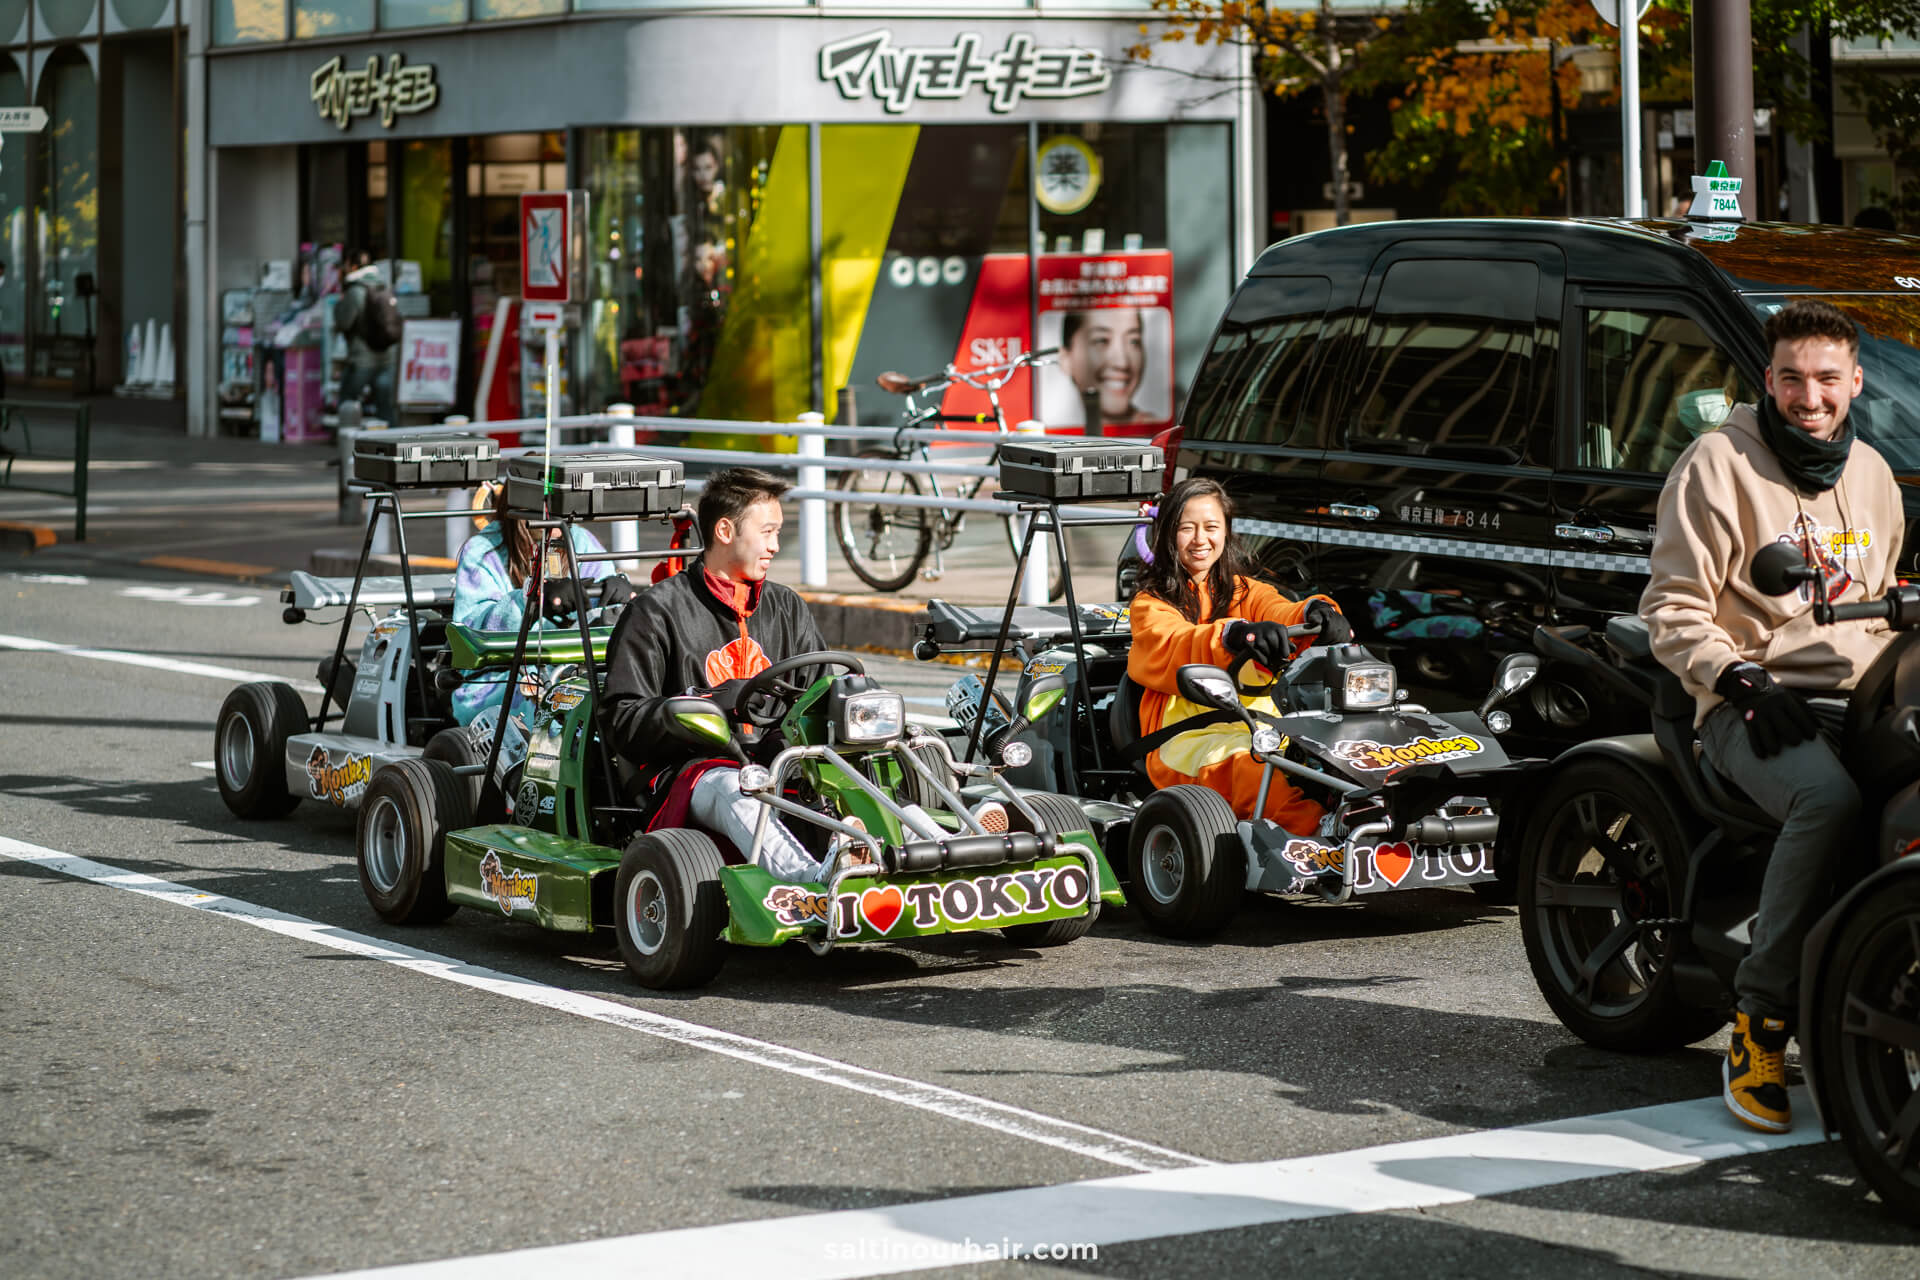 things to do in Tokyo go kart